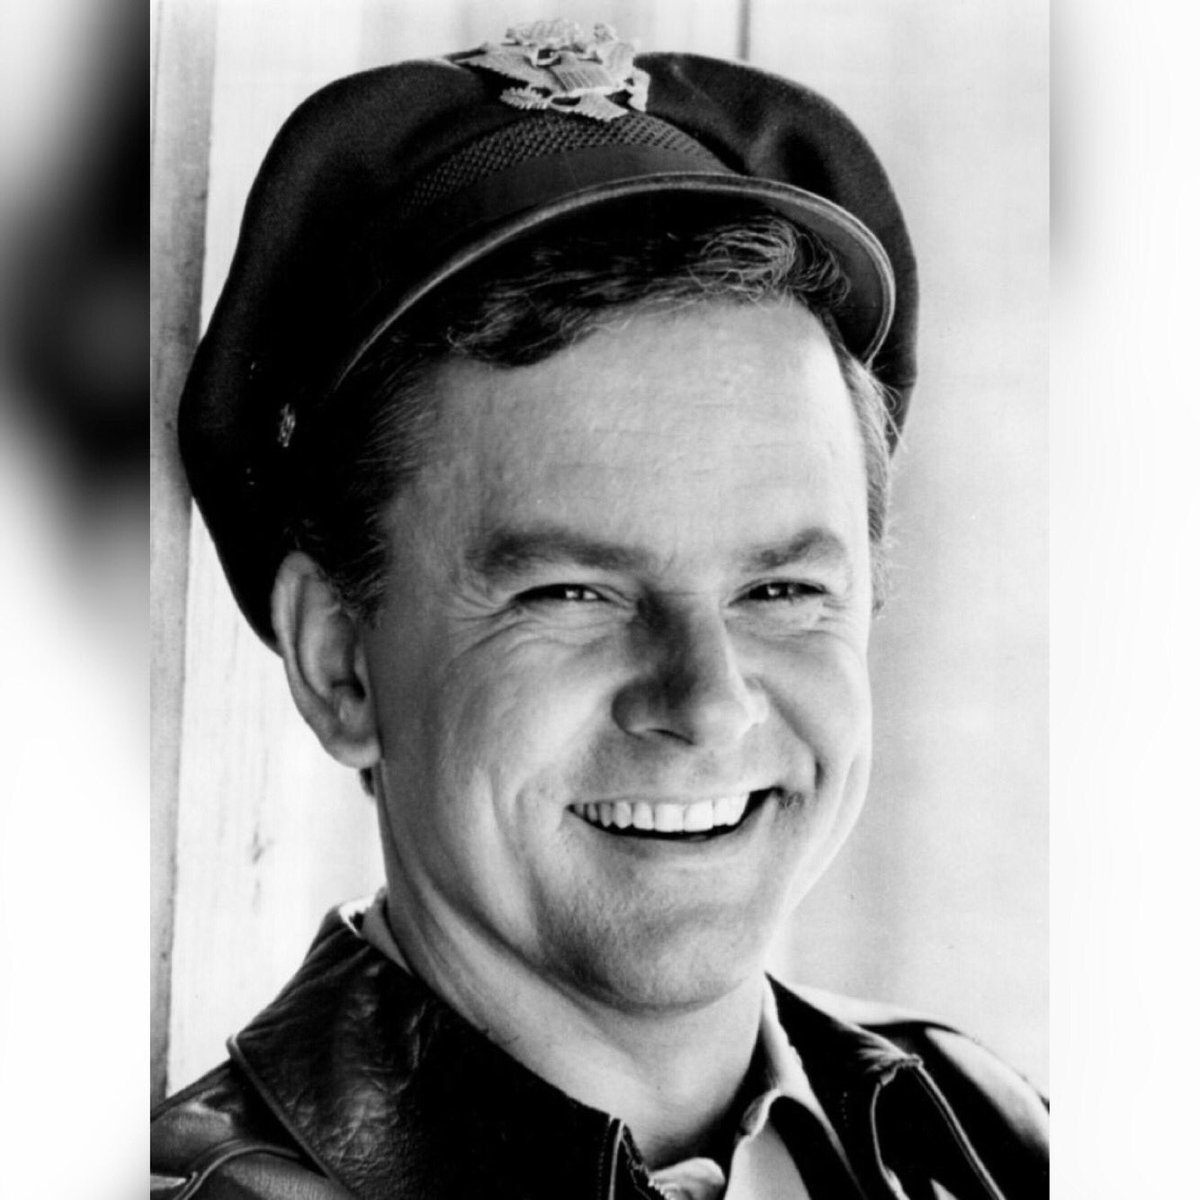 More key images from this week’s episode (#163):1. Bob Crane as Robert Hoga...